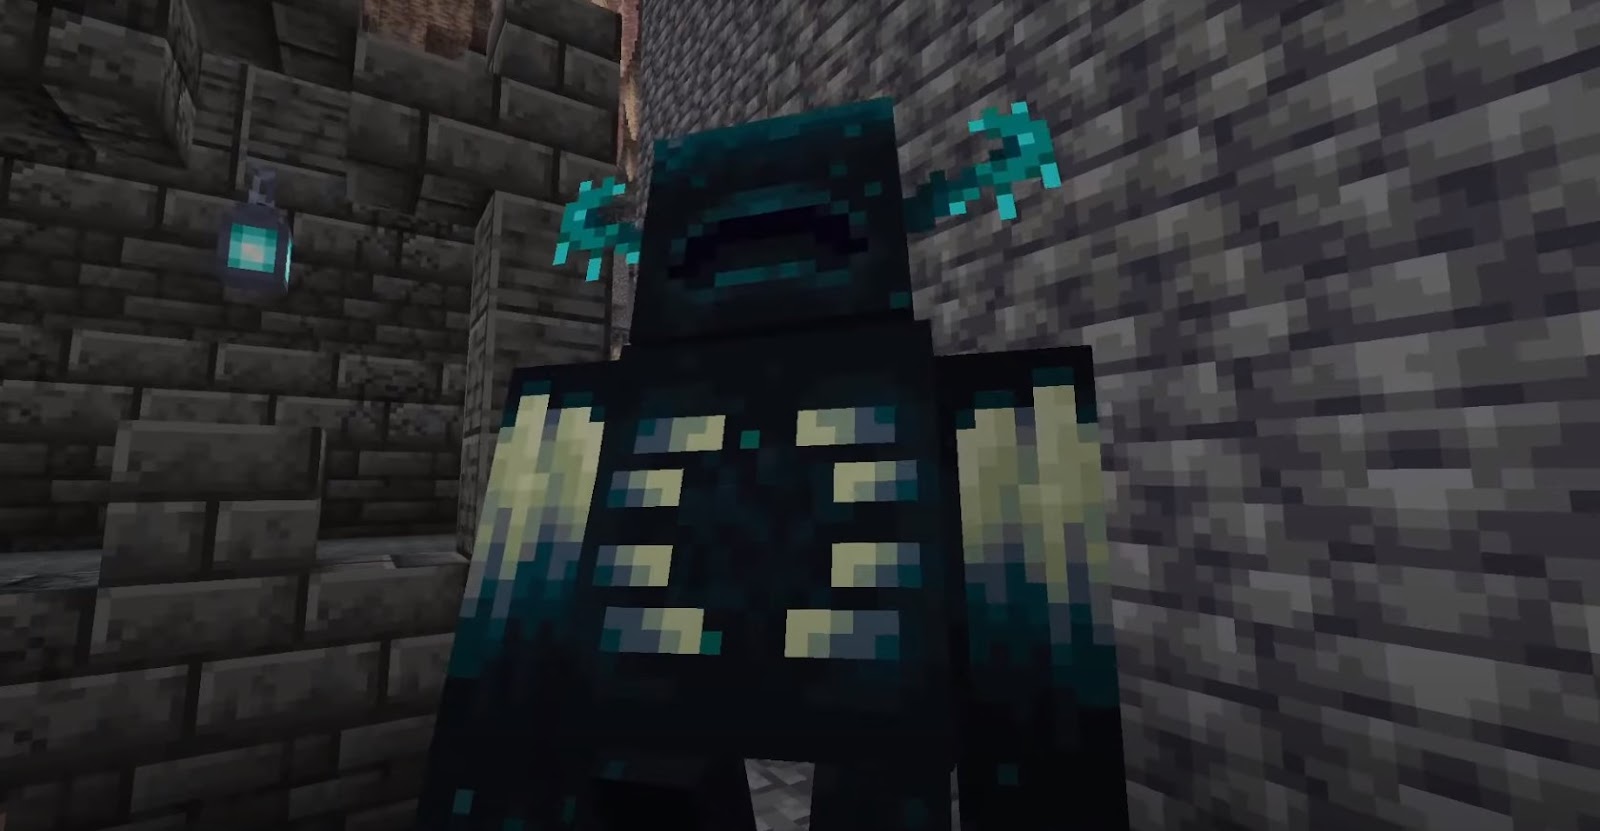 the most lethal and strongest mob in Minecraft, the Warden